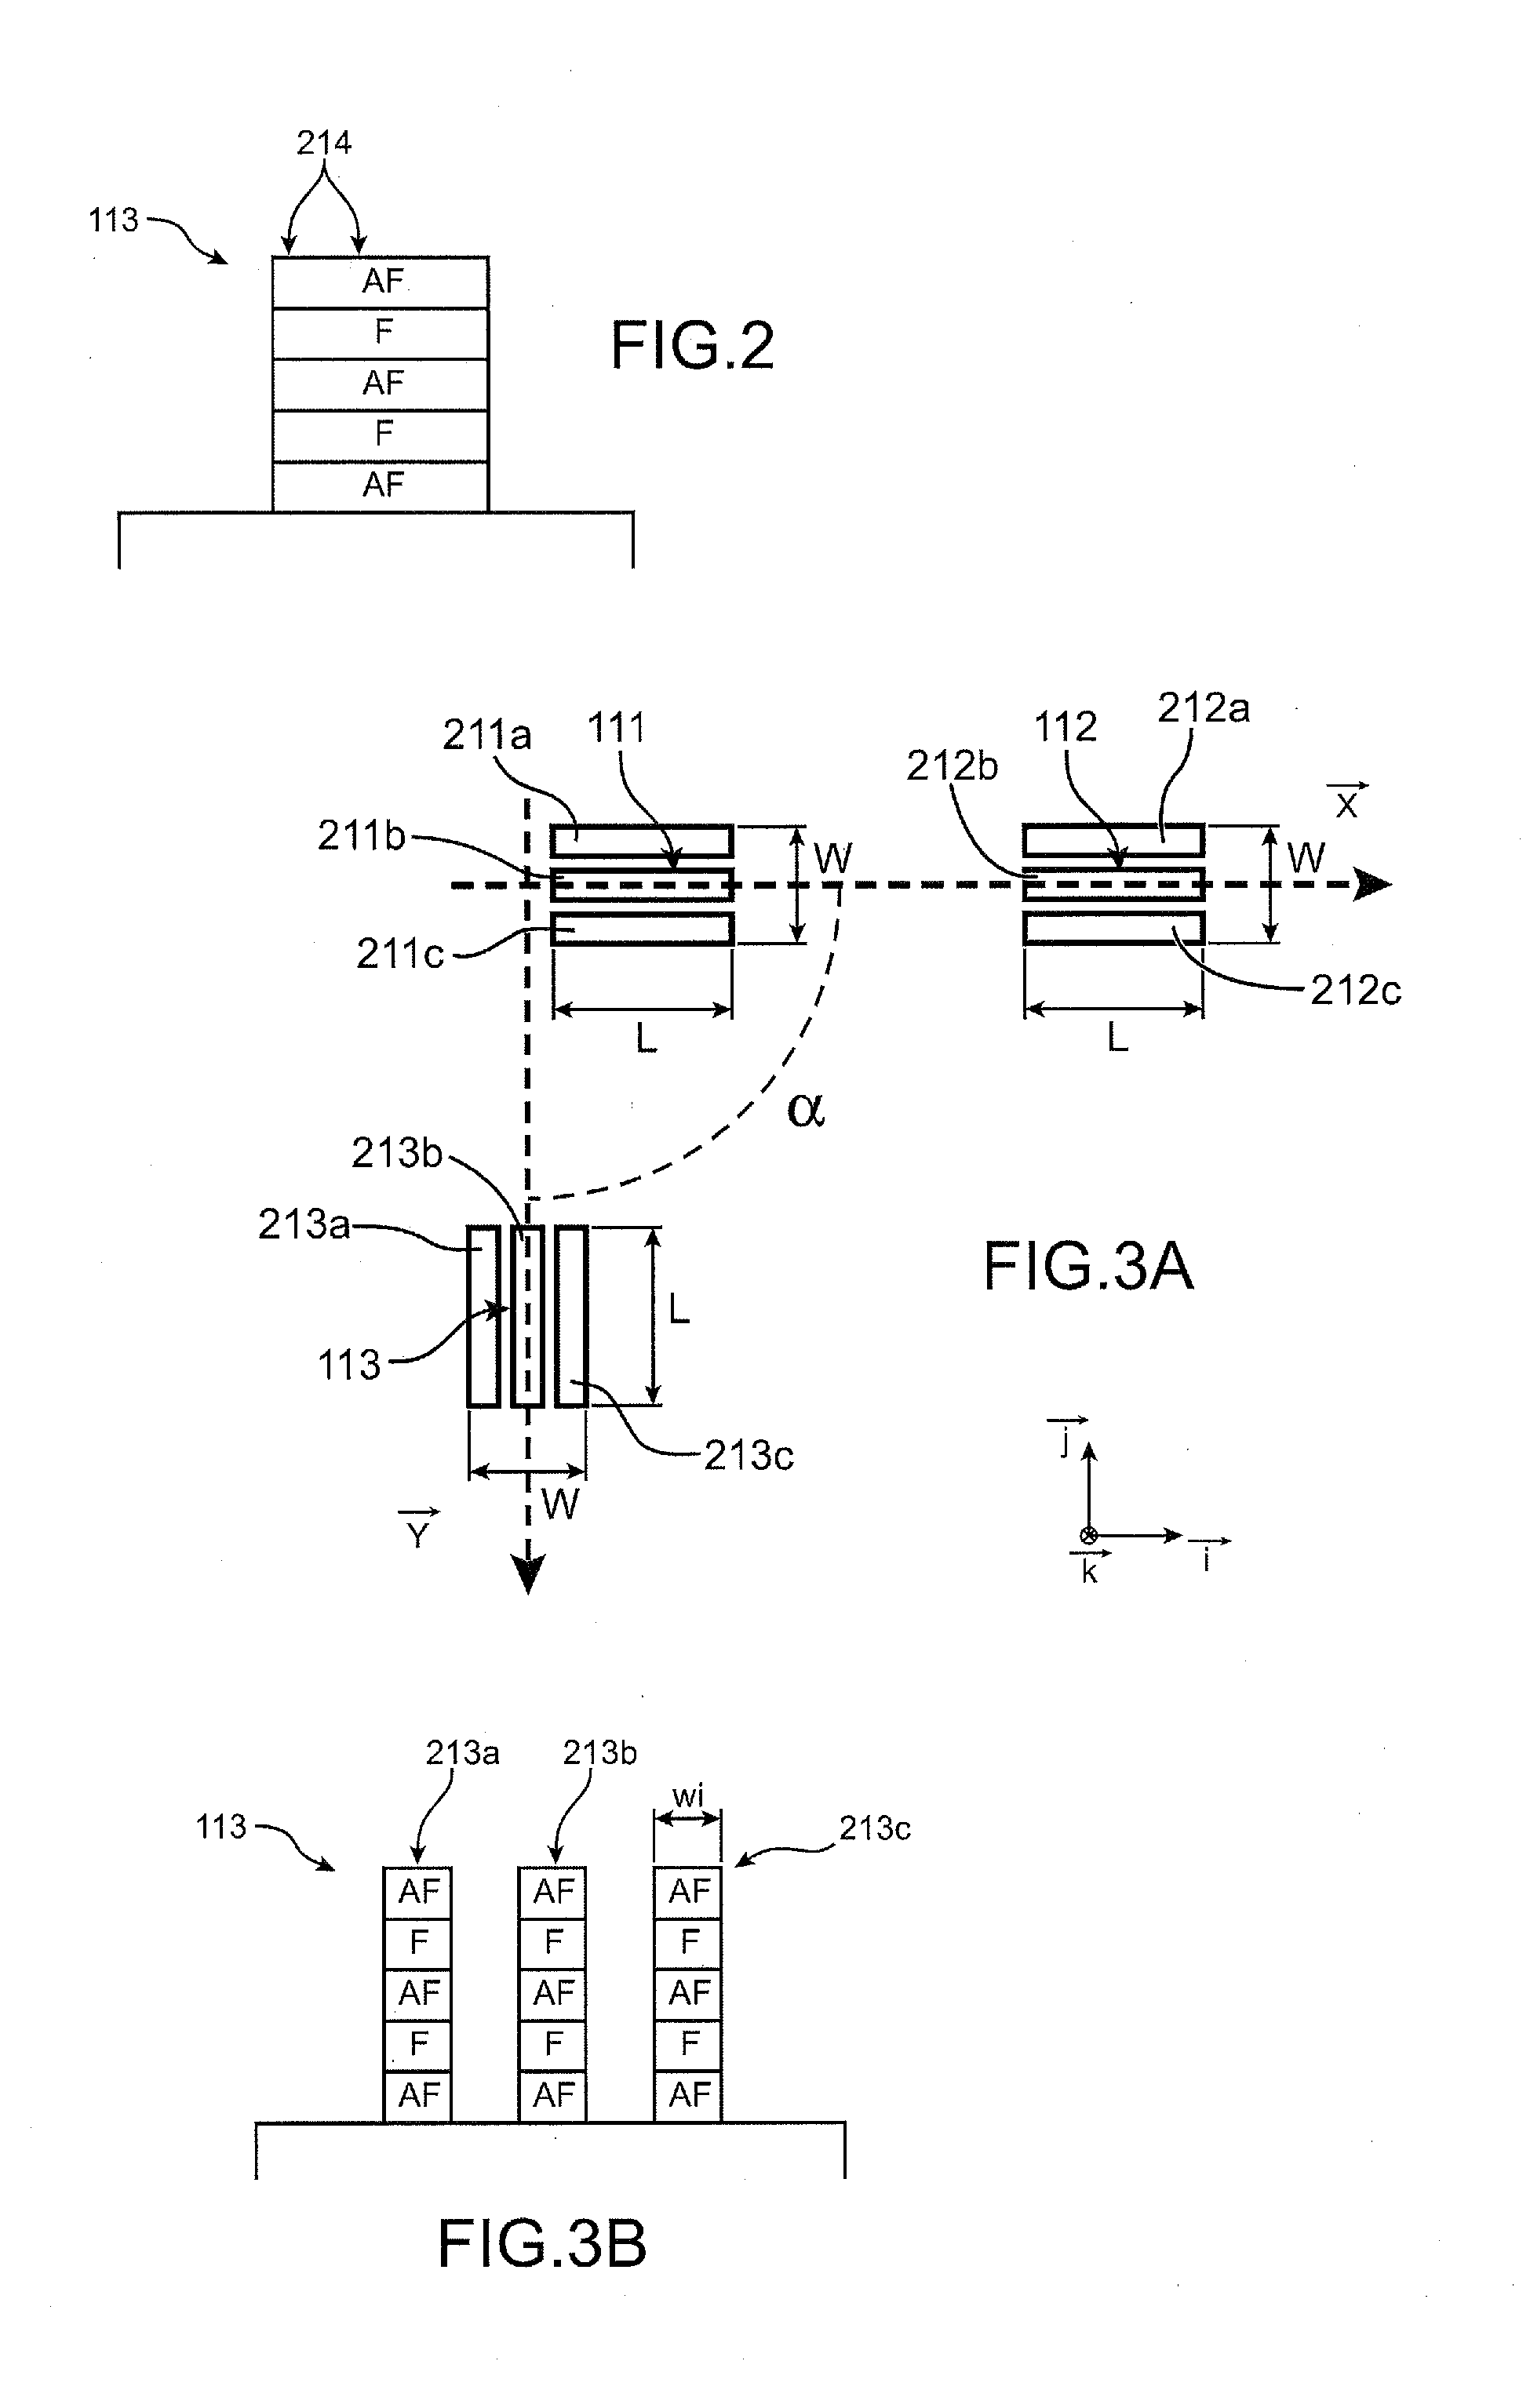 Production of a device comprising magnetic structures formed on one and the same substrate and having respective different magnetization orientations